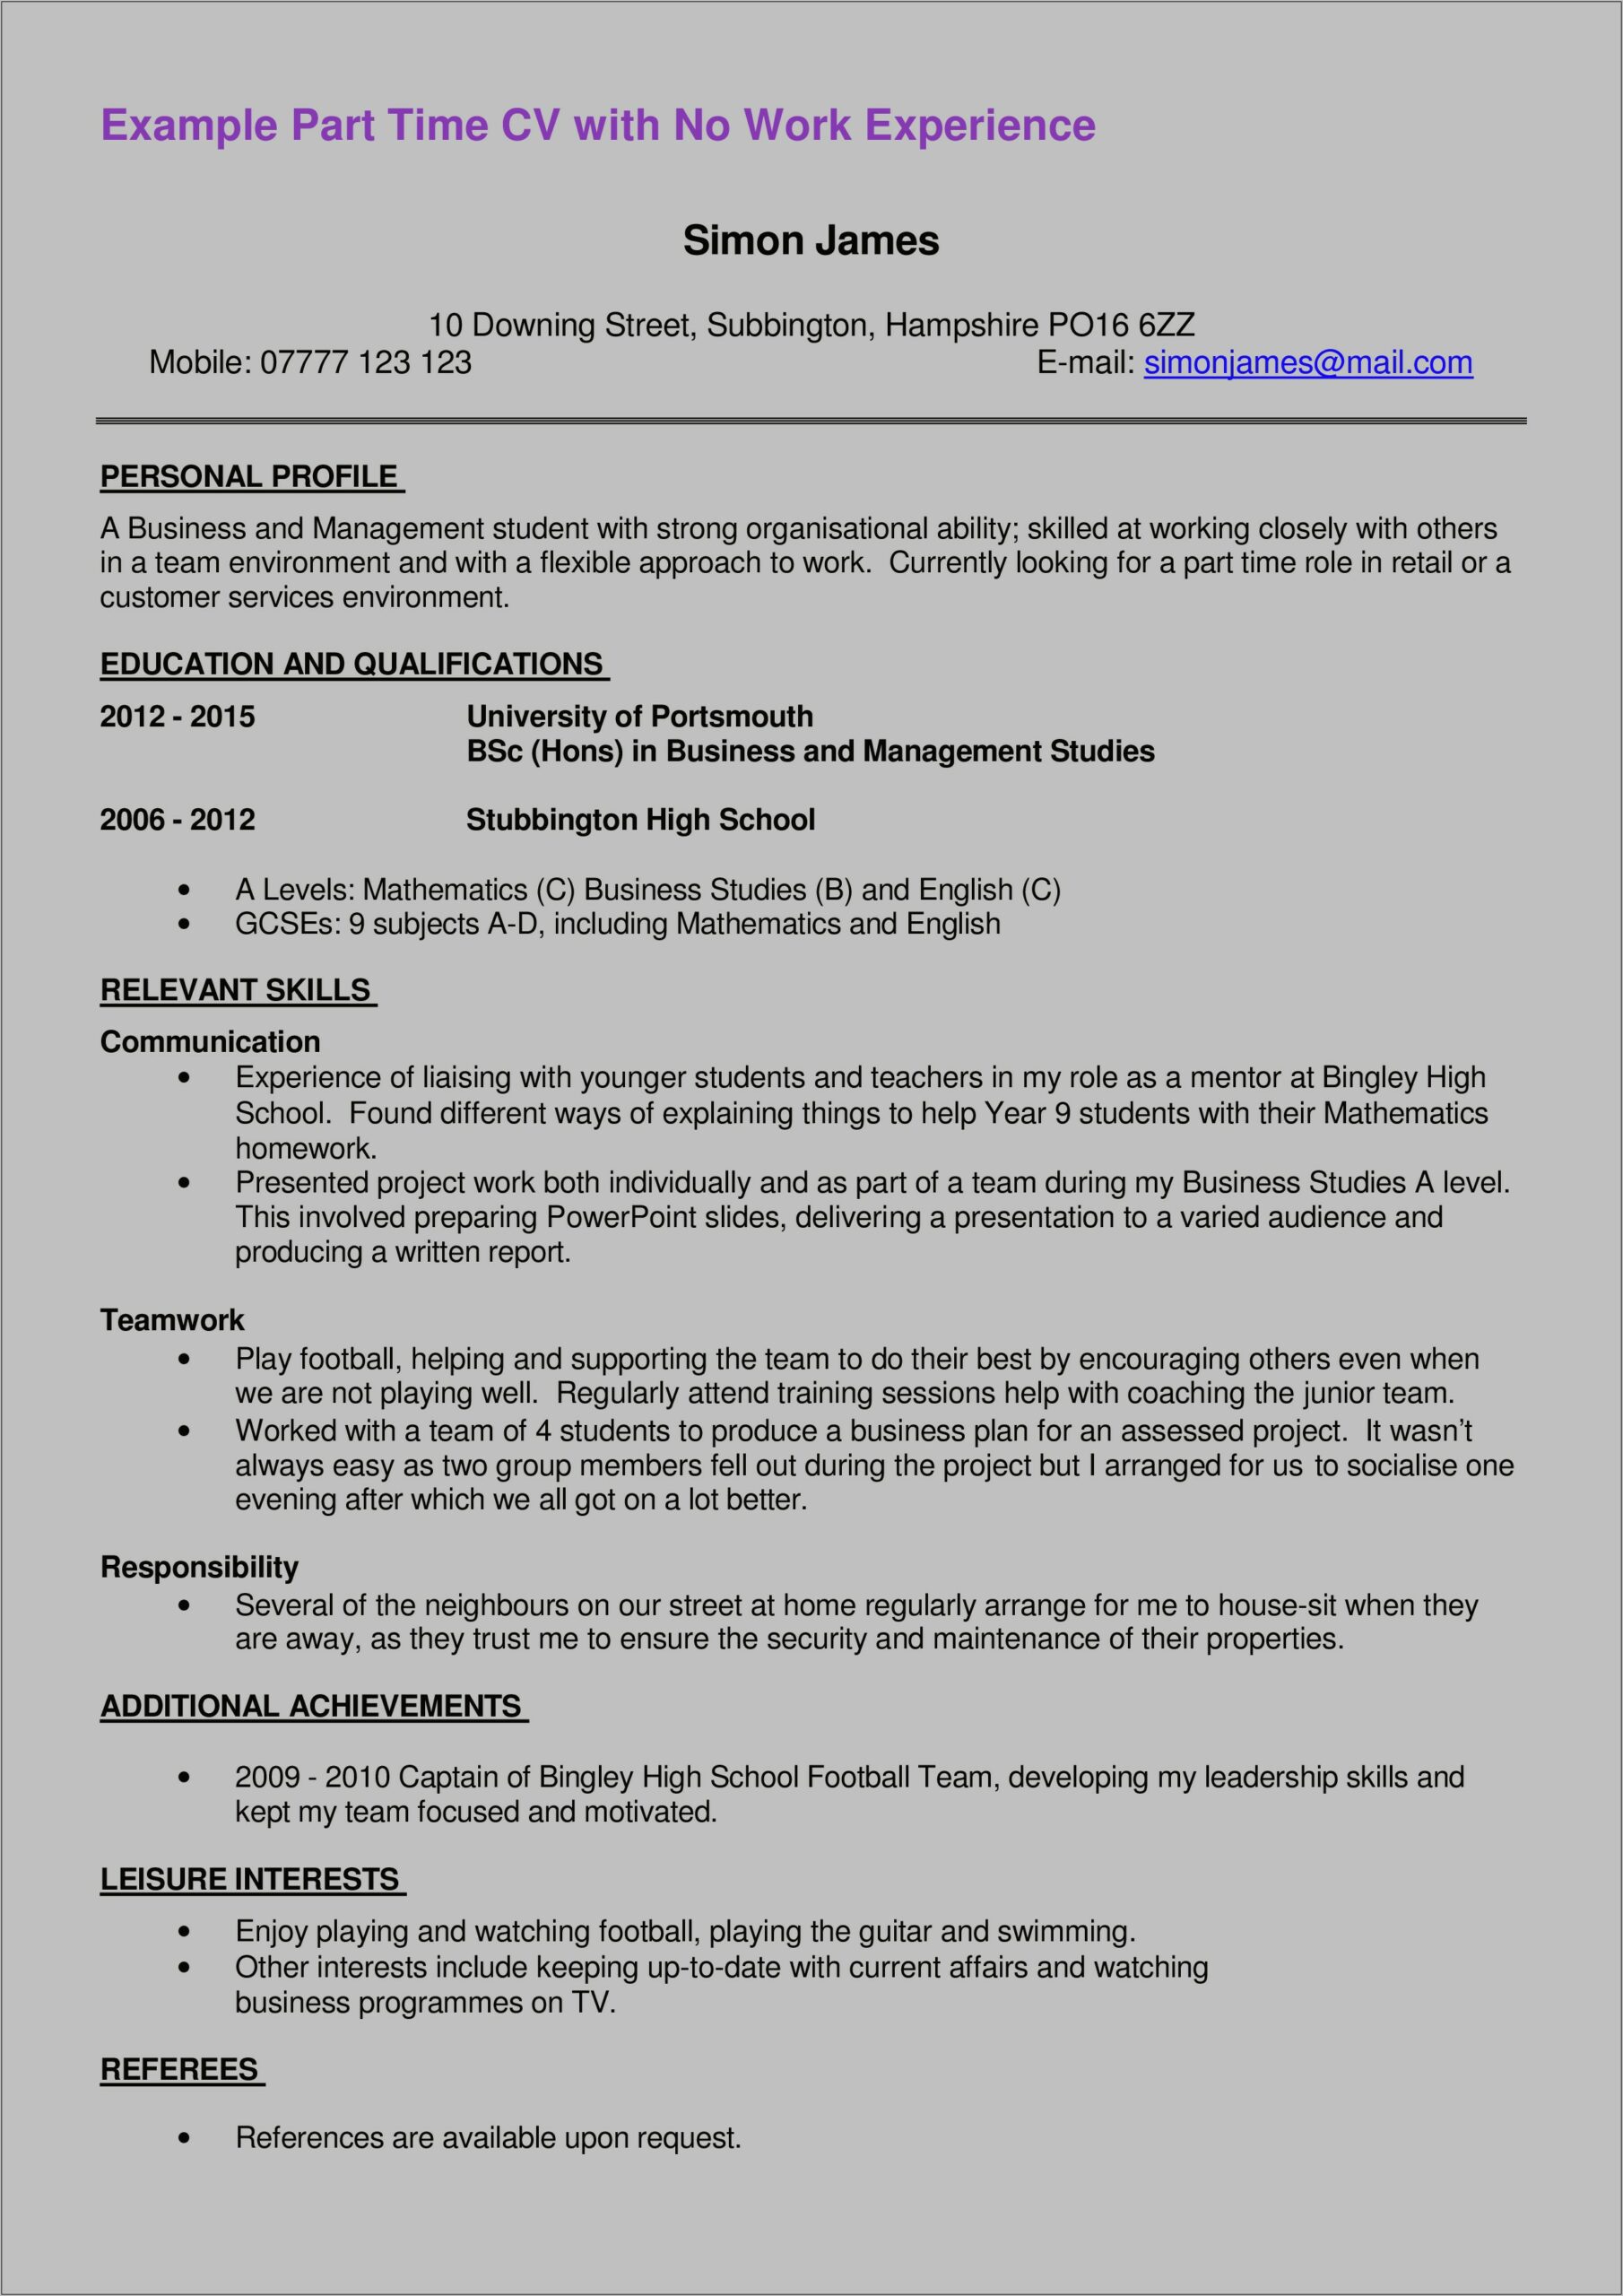 No Work Experience College Resume Sample